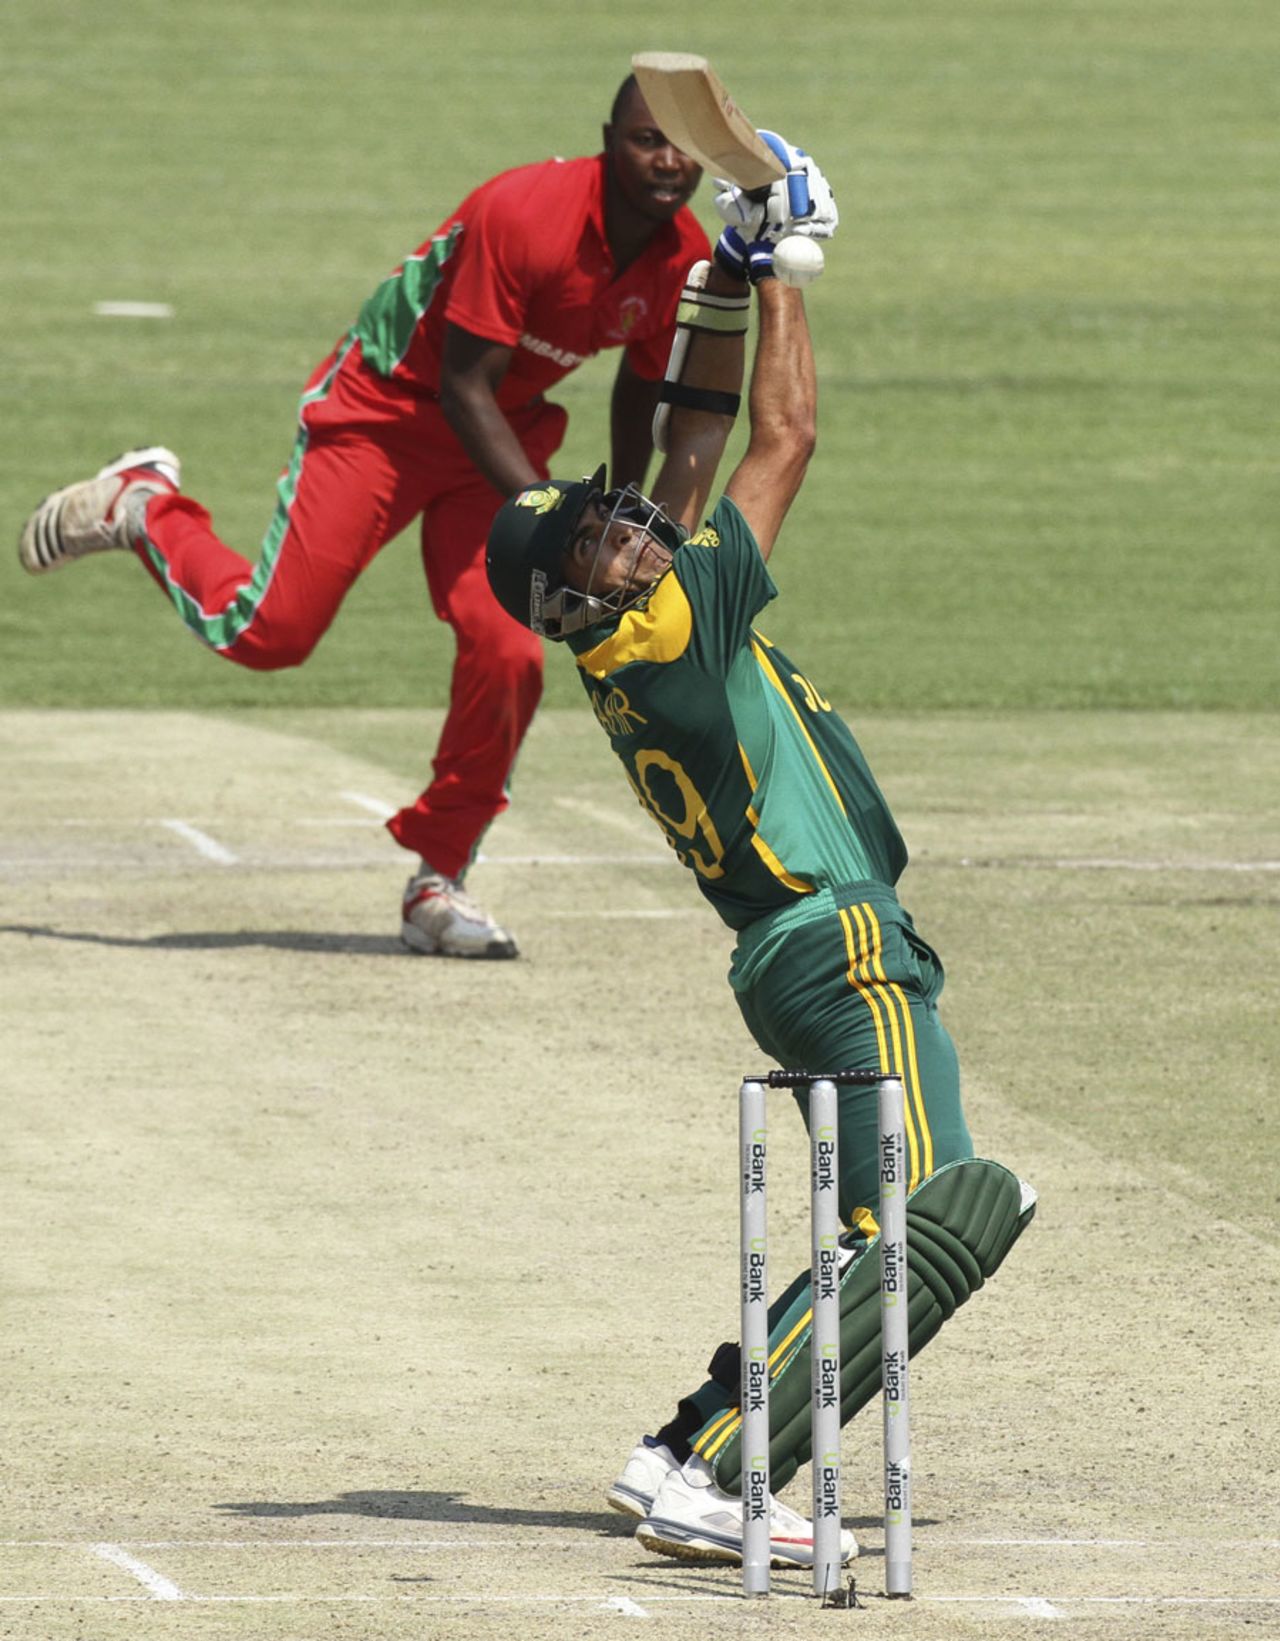 Imran Tahir chipped in with a handy 23, Zimbabwe v South Africa, tri-series, Harare, August 29, 2014